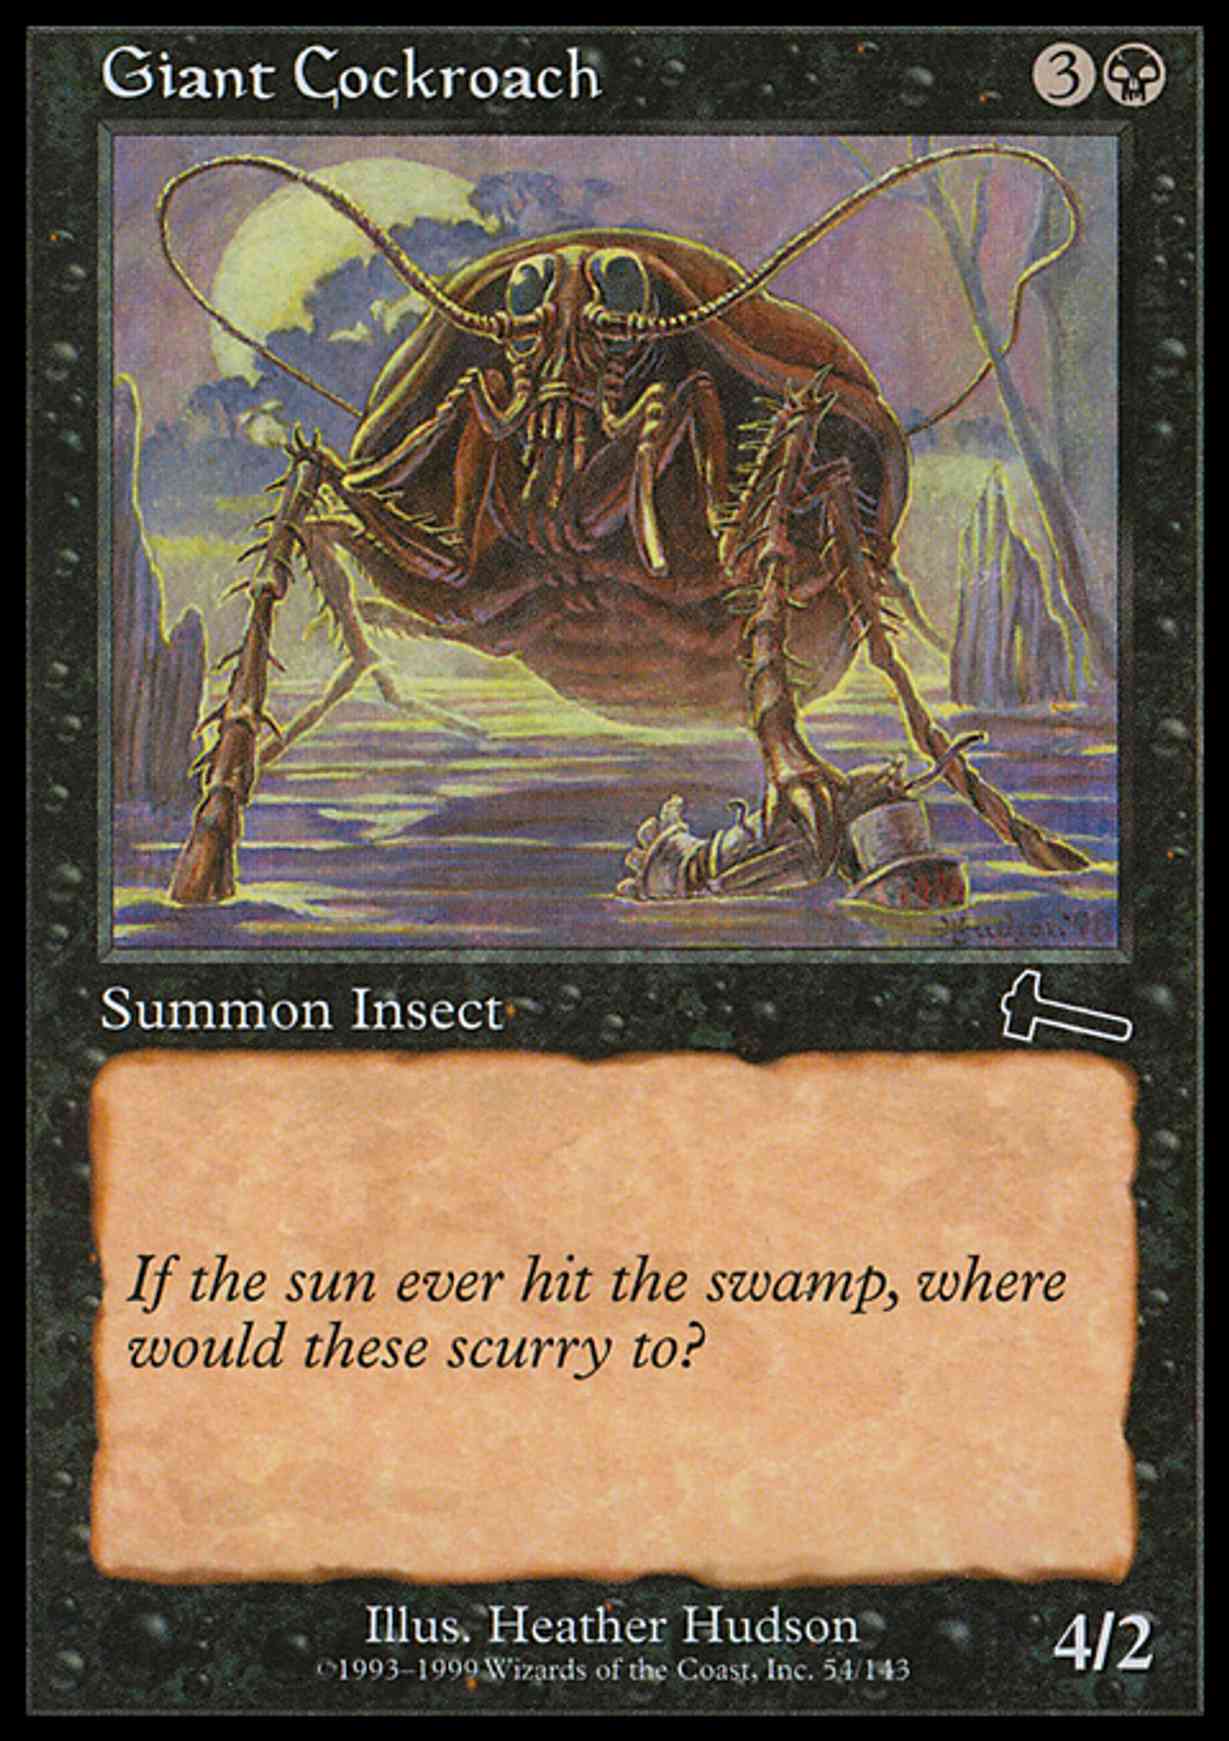 Giant Cockroach magic card front